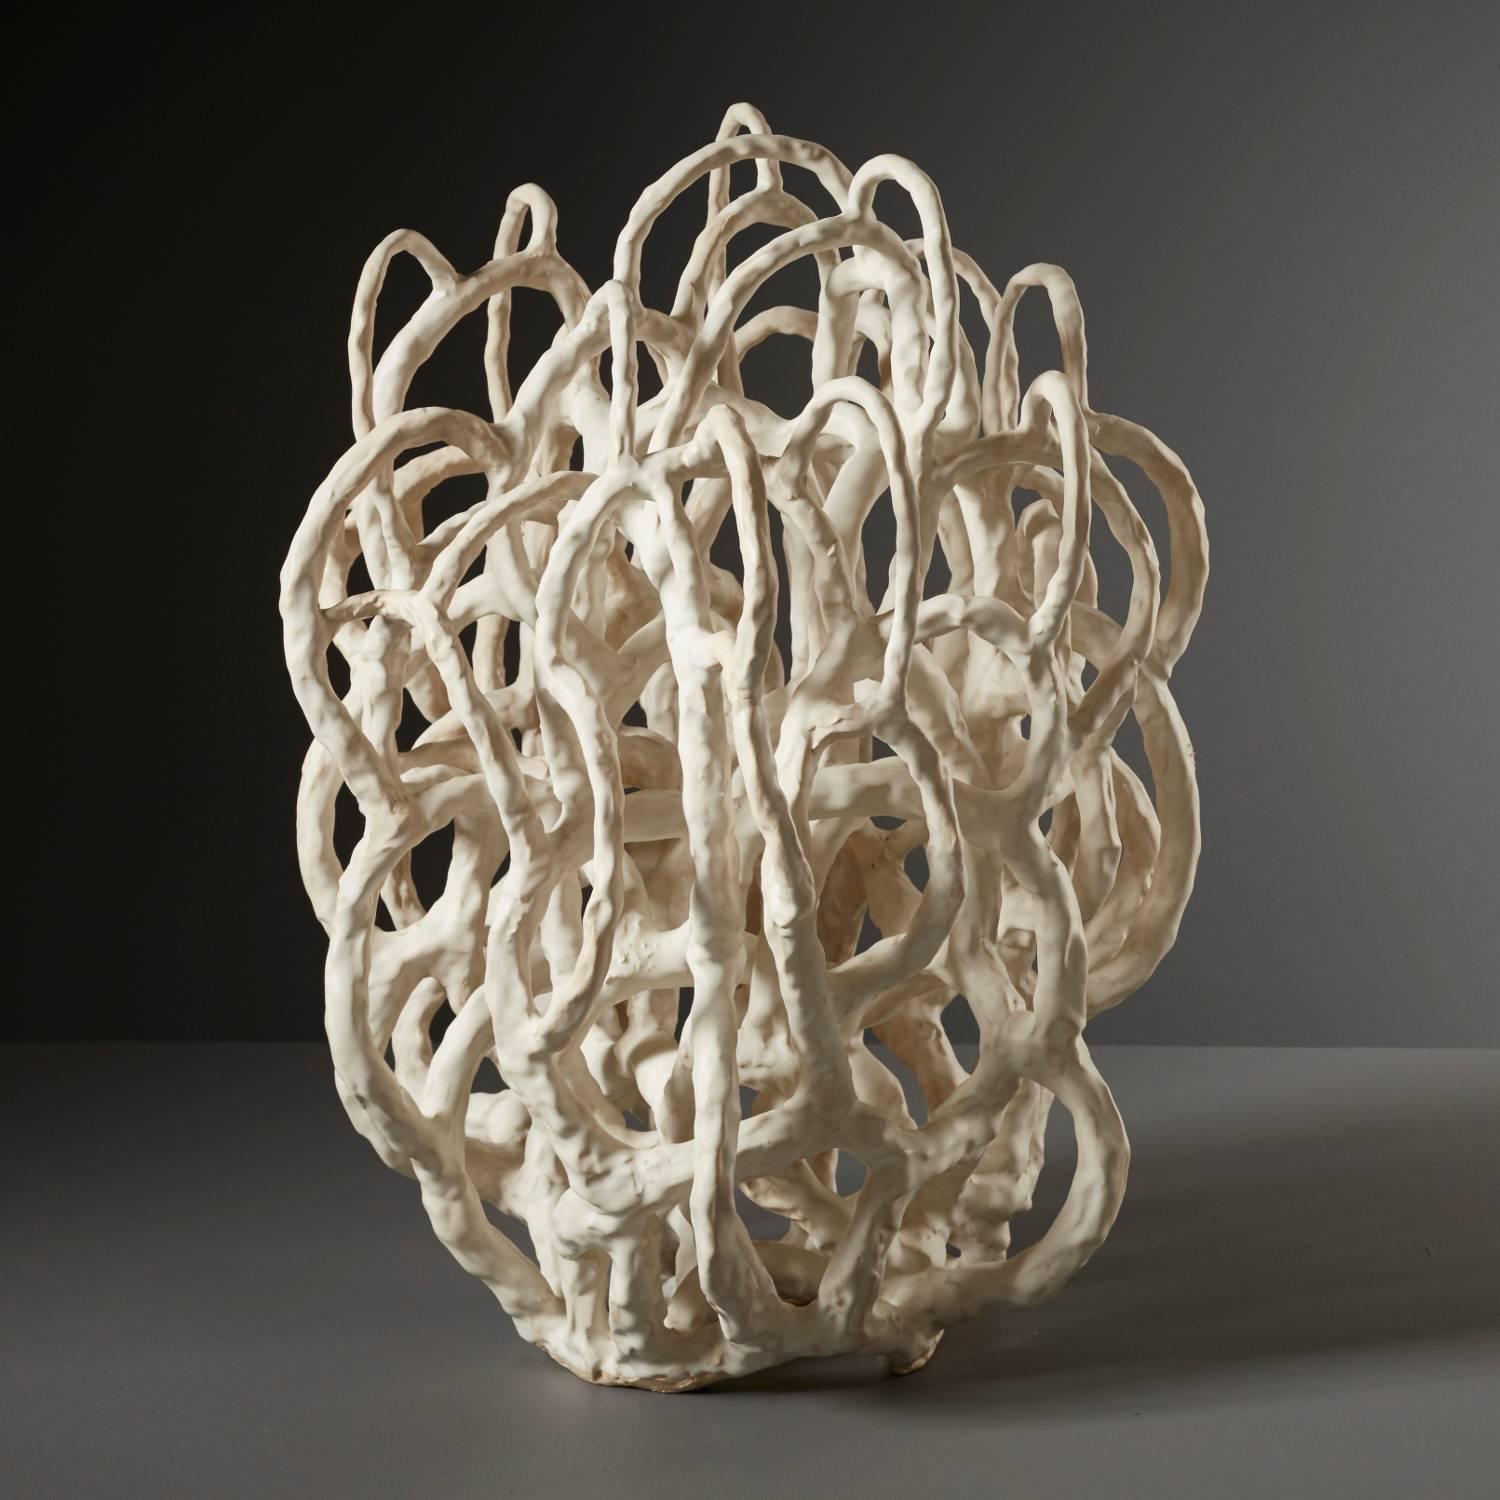 Daniel Reynold’s ‘White Rope Abstraction’ is an abstract sculptural piece. An exercise in the art of capturing movement through clay. Organic in form, and hand built in stoneware clay, this lively work is carefully detailed to capture the light and